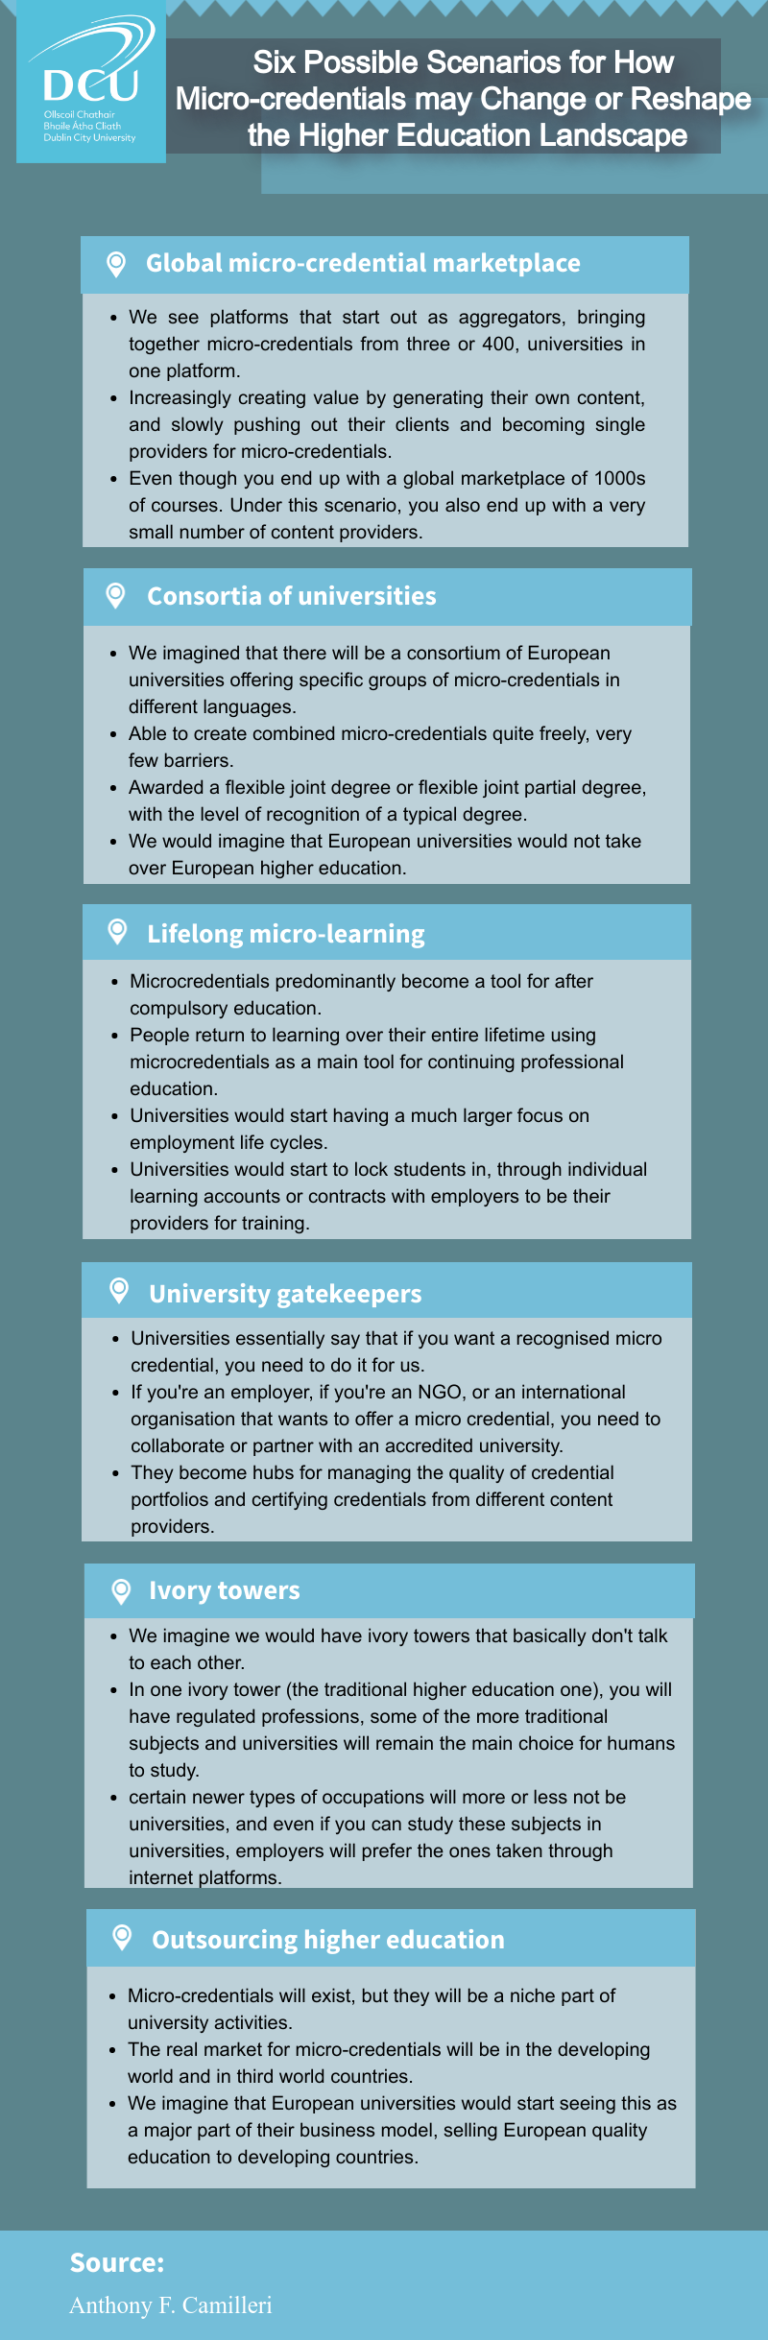 Infographic on the six scenarios explained in the video above. Global micro-credential marketplace, Consortia of universities, Lifelong micro-learning, University gatekeepers, Ivory towers, Outsourcing higher education